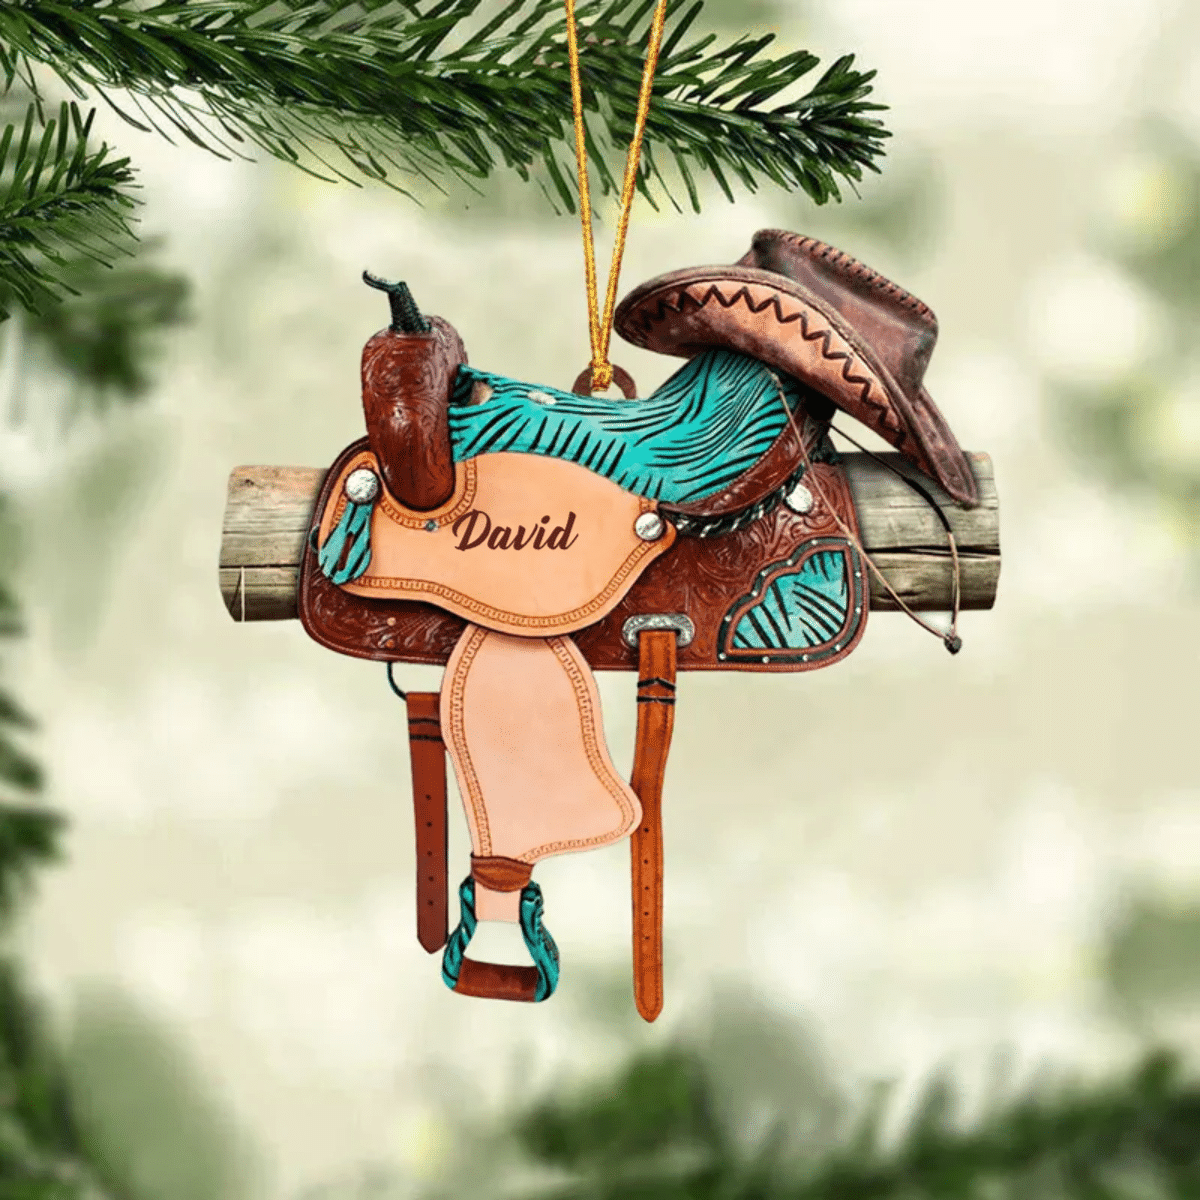 Personalized Horse Saddle Ornament For Horse Lovers/ Cowboy Cowgirl